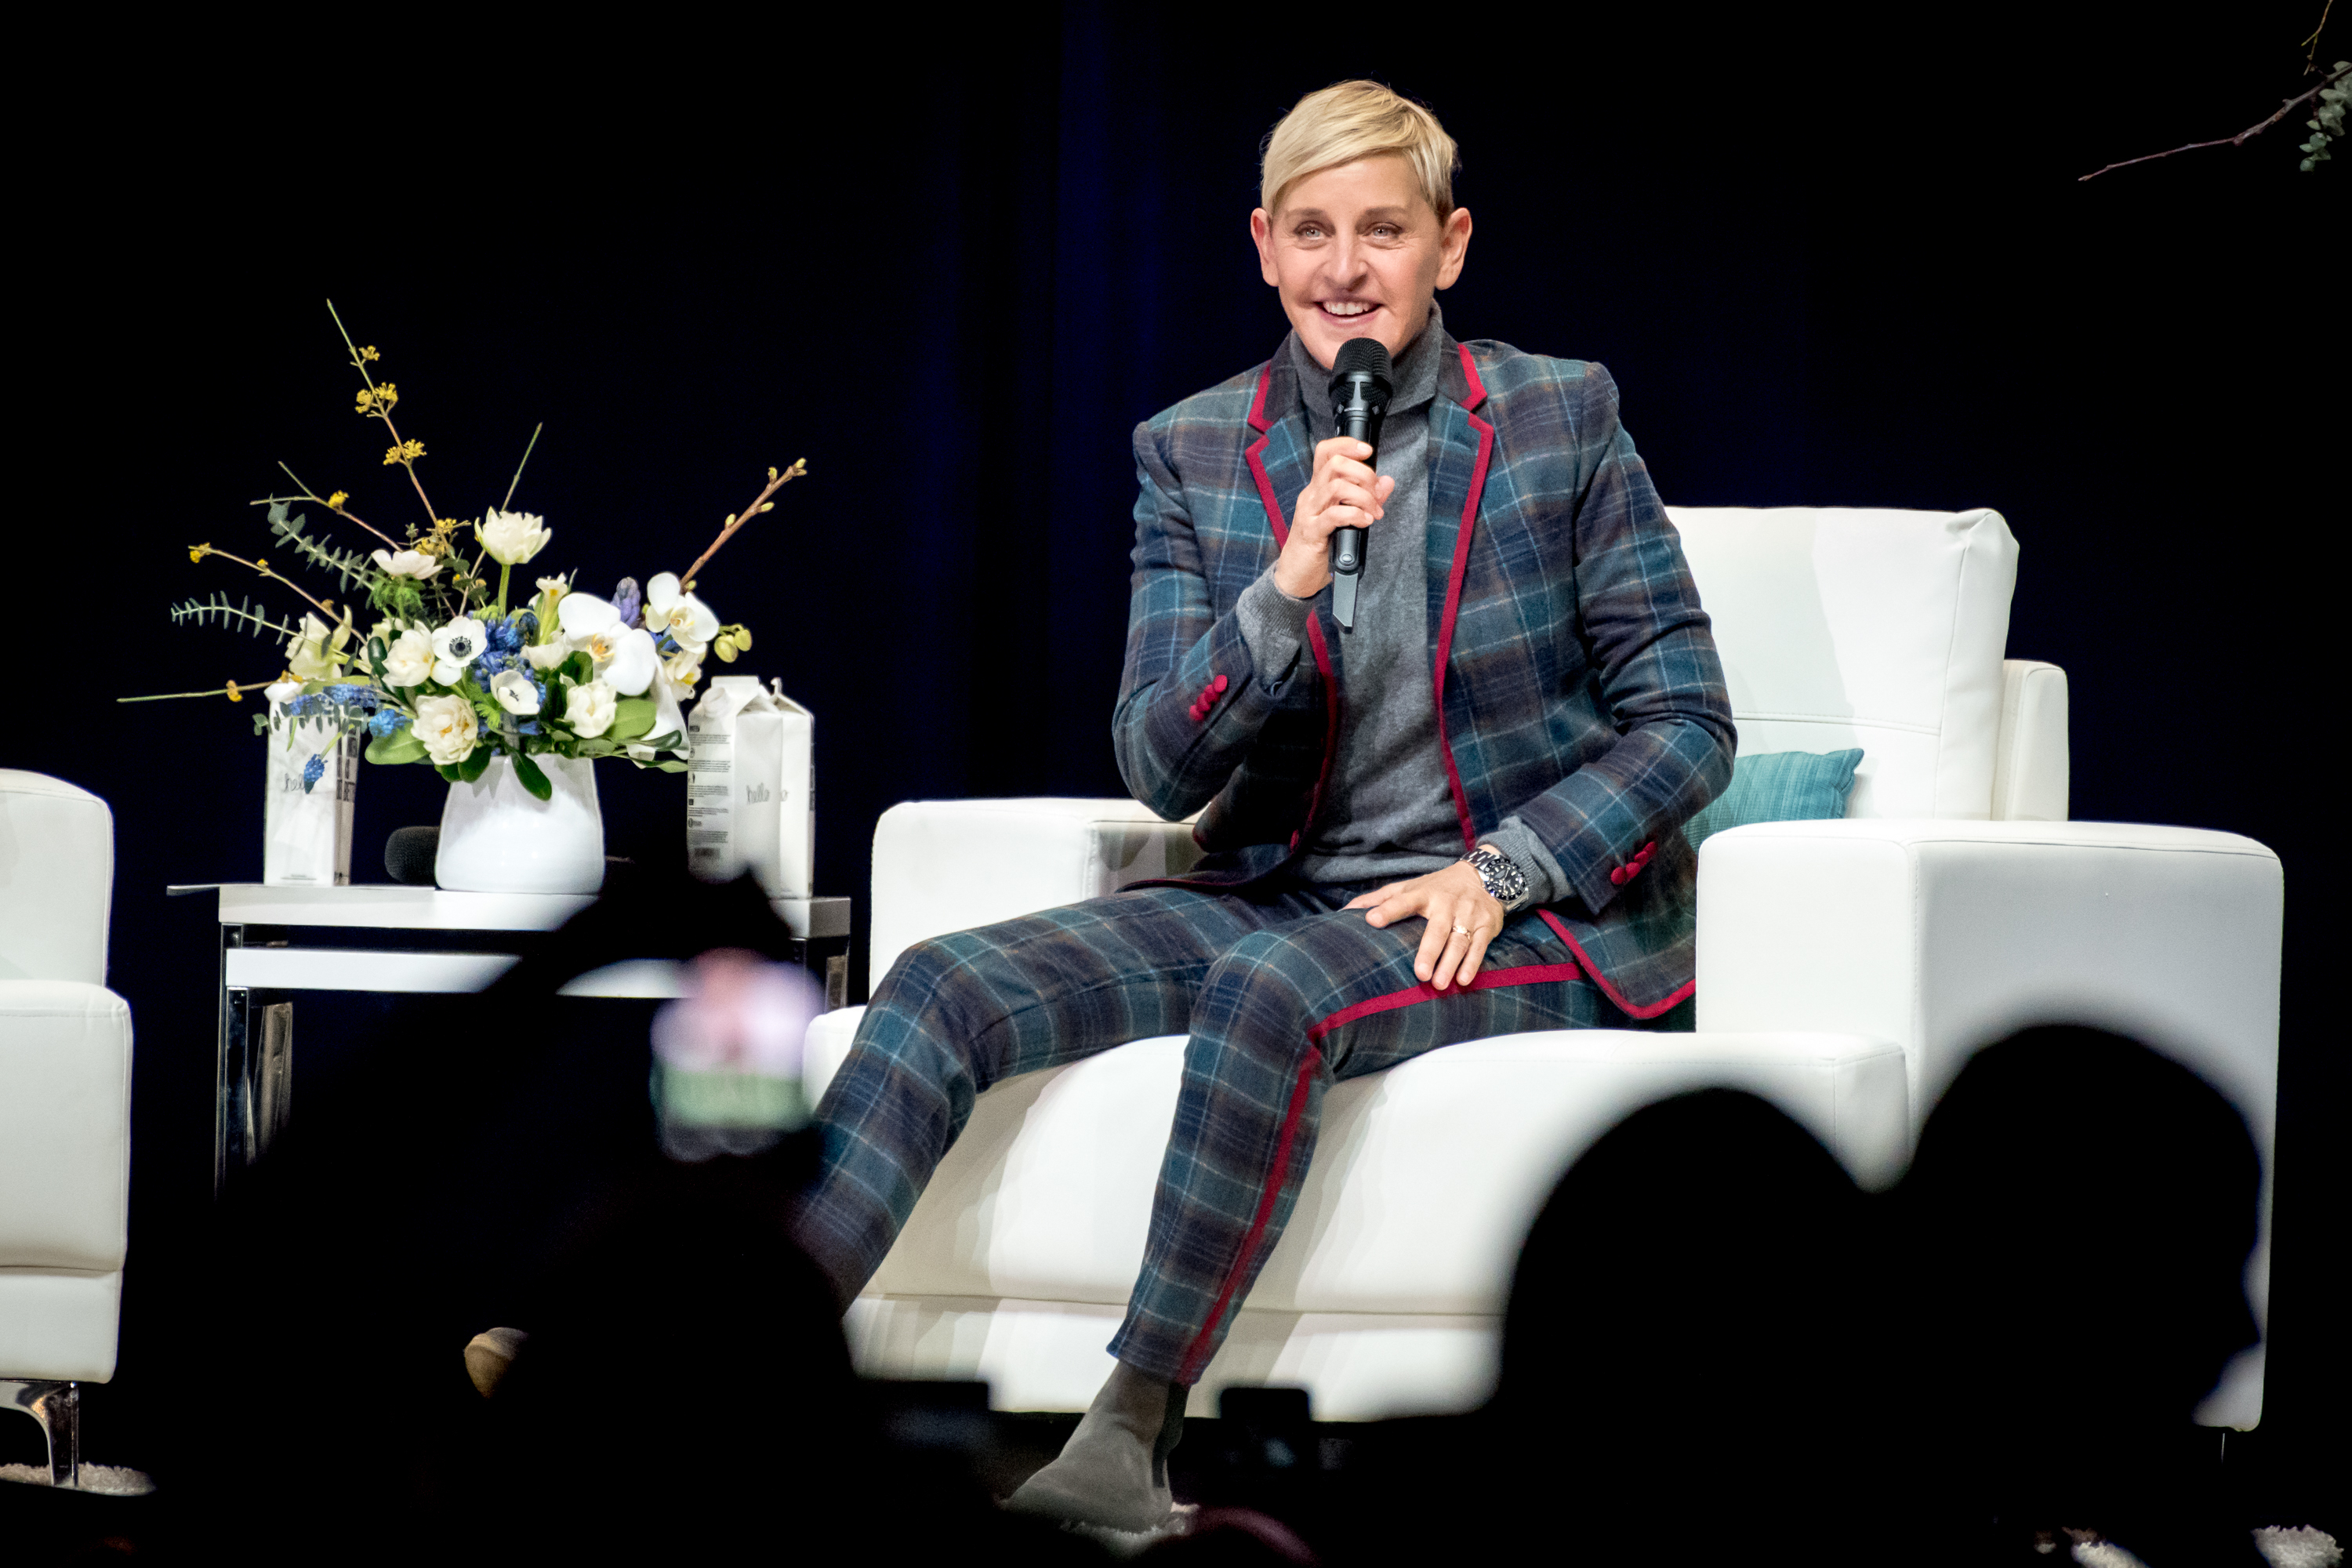 Ellen DeGeneres speaking at an event, wearing a plaid suit and seated on a white chair onstage